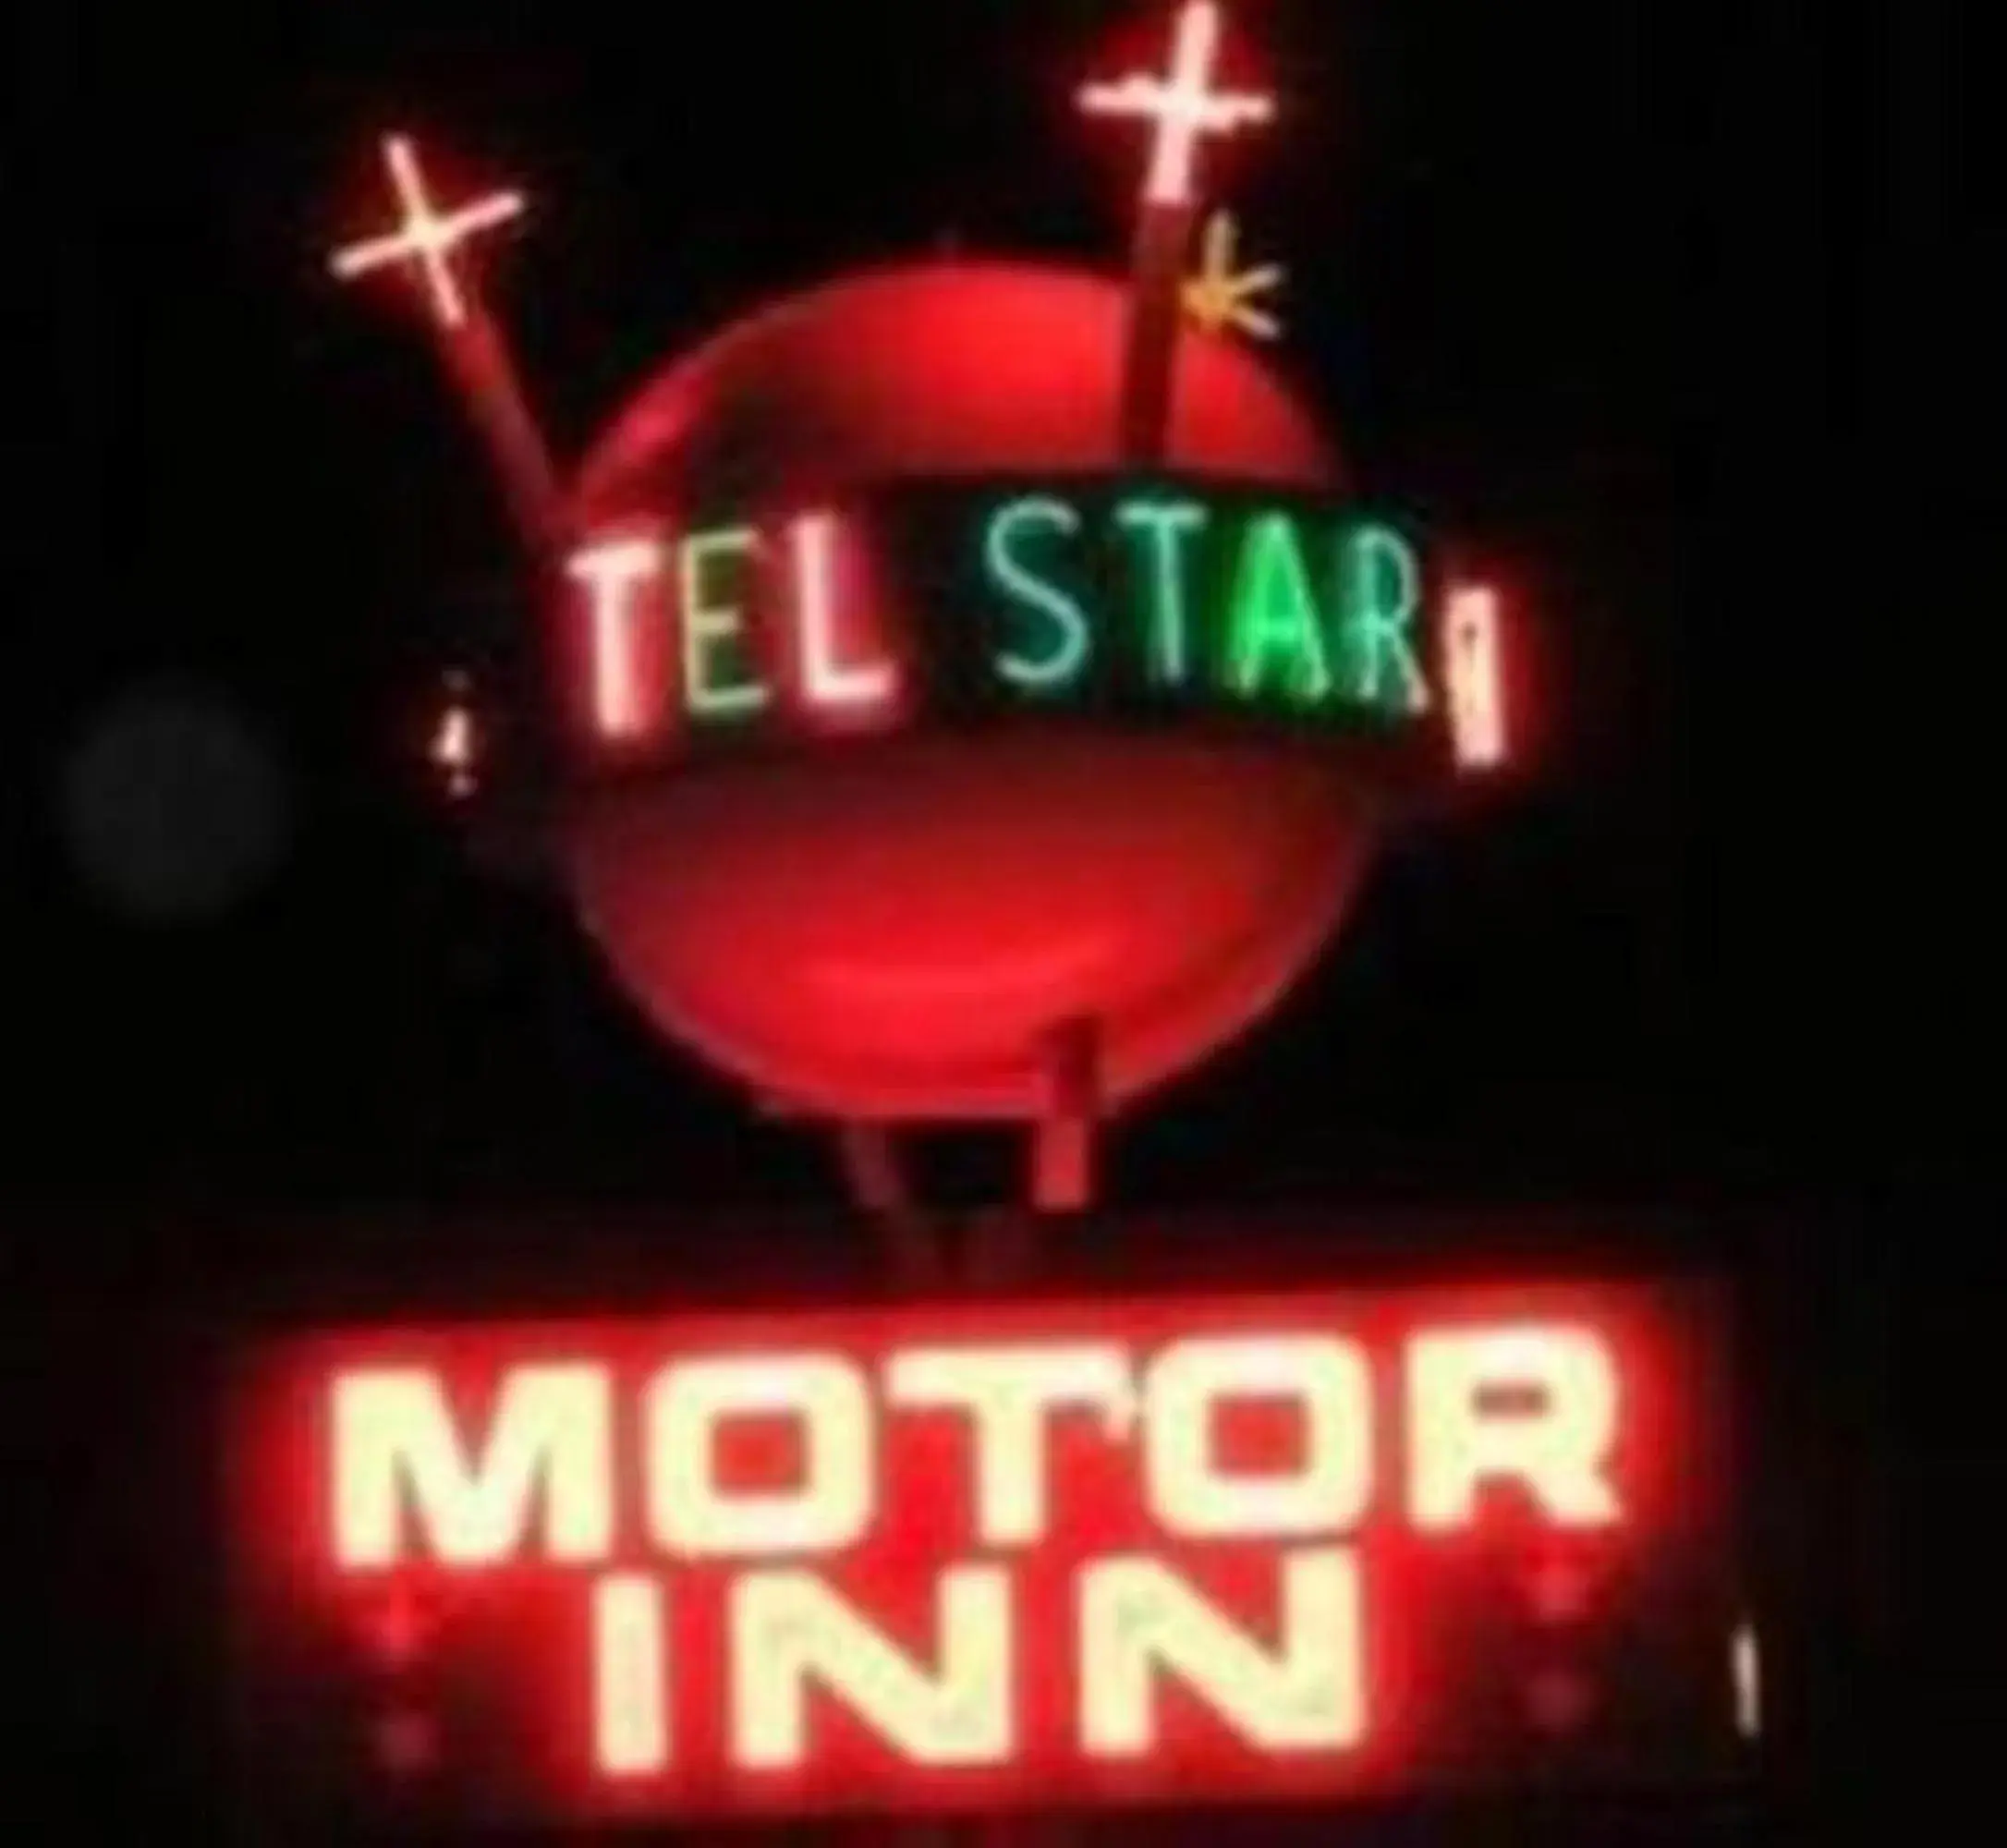 On site, Property Logo/Sign in Tel Star Motel